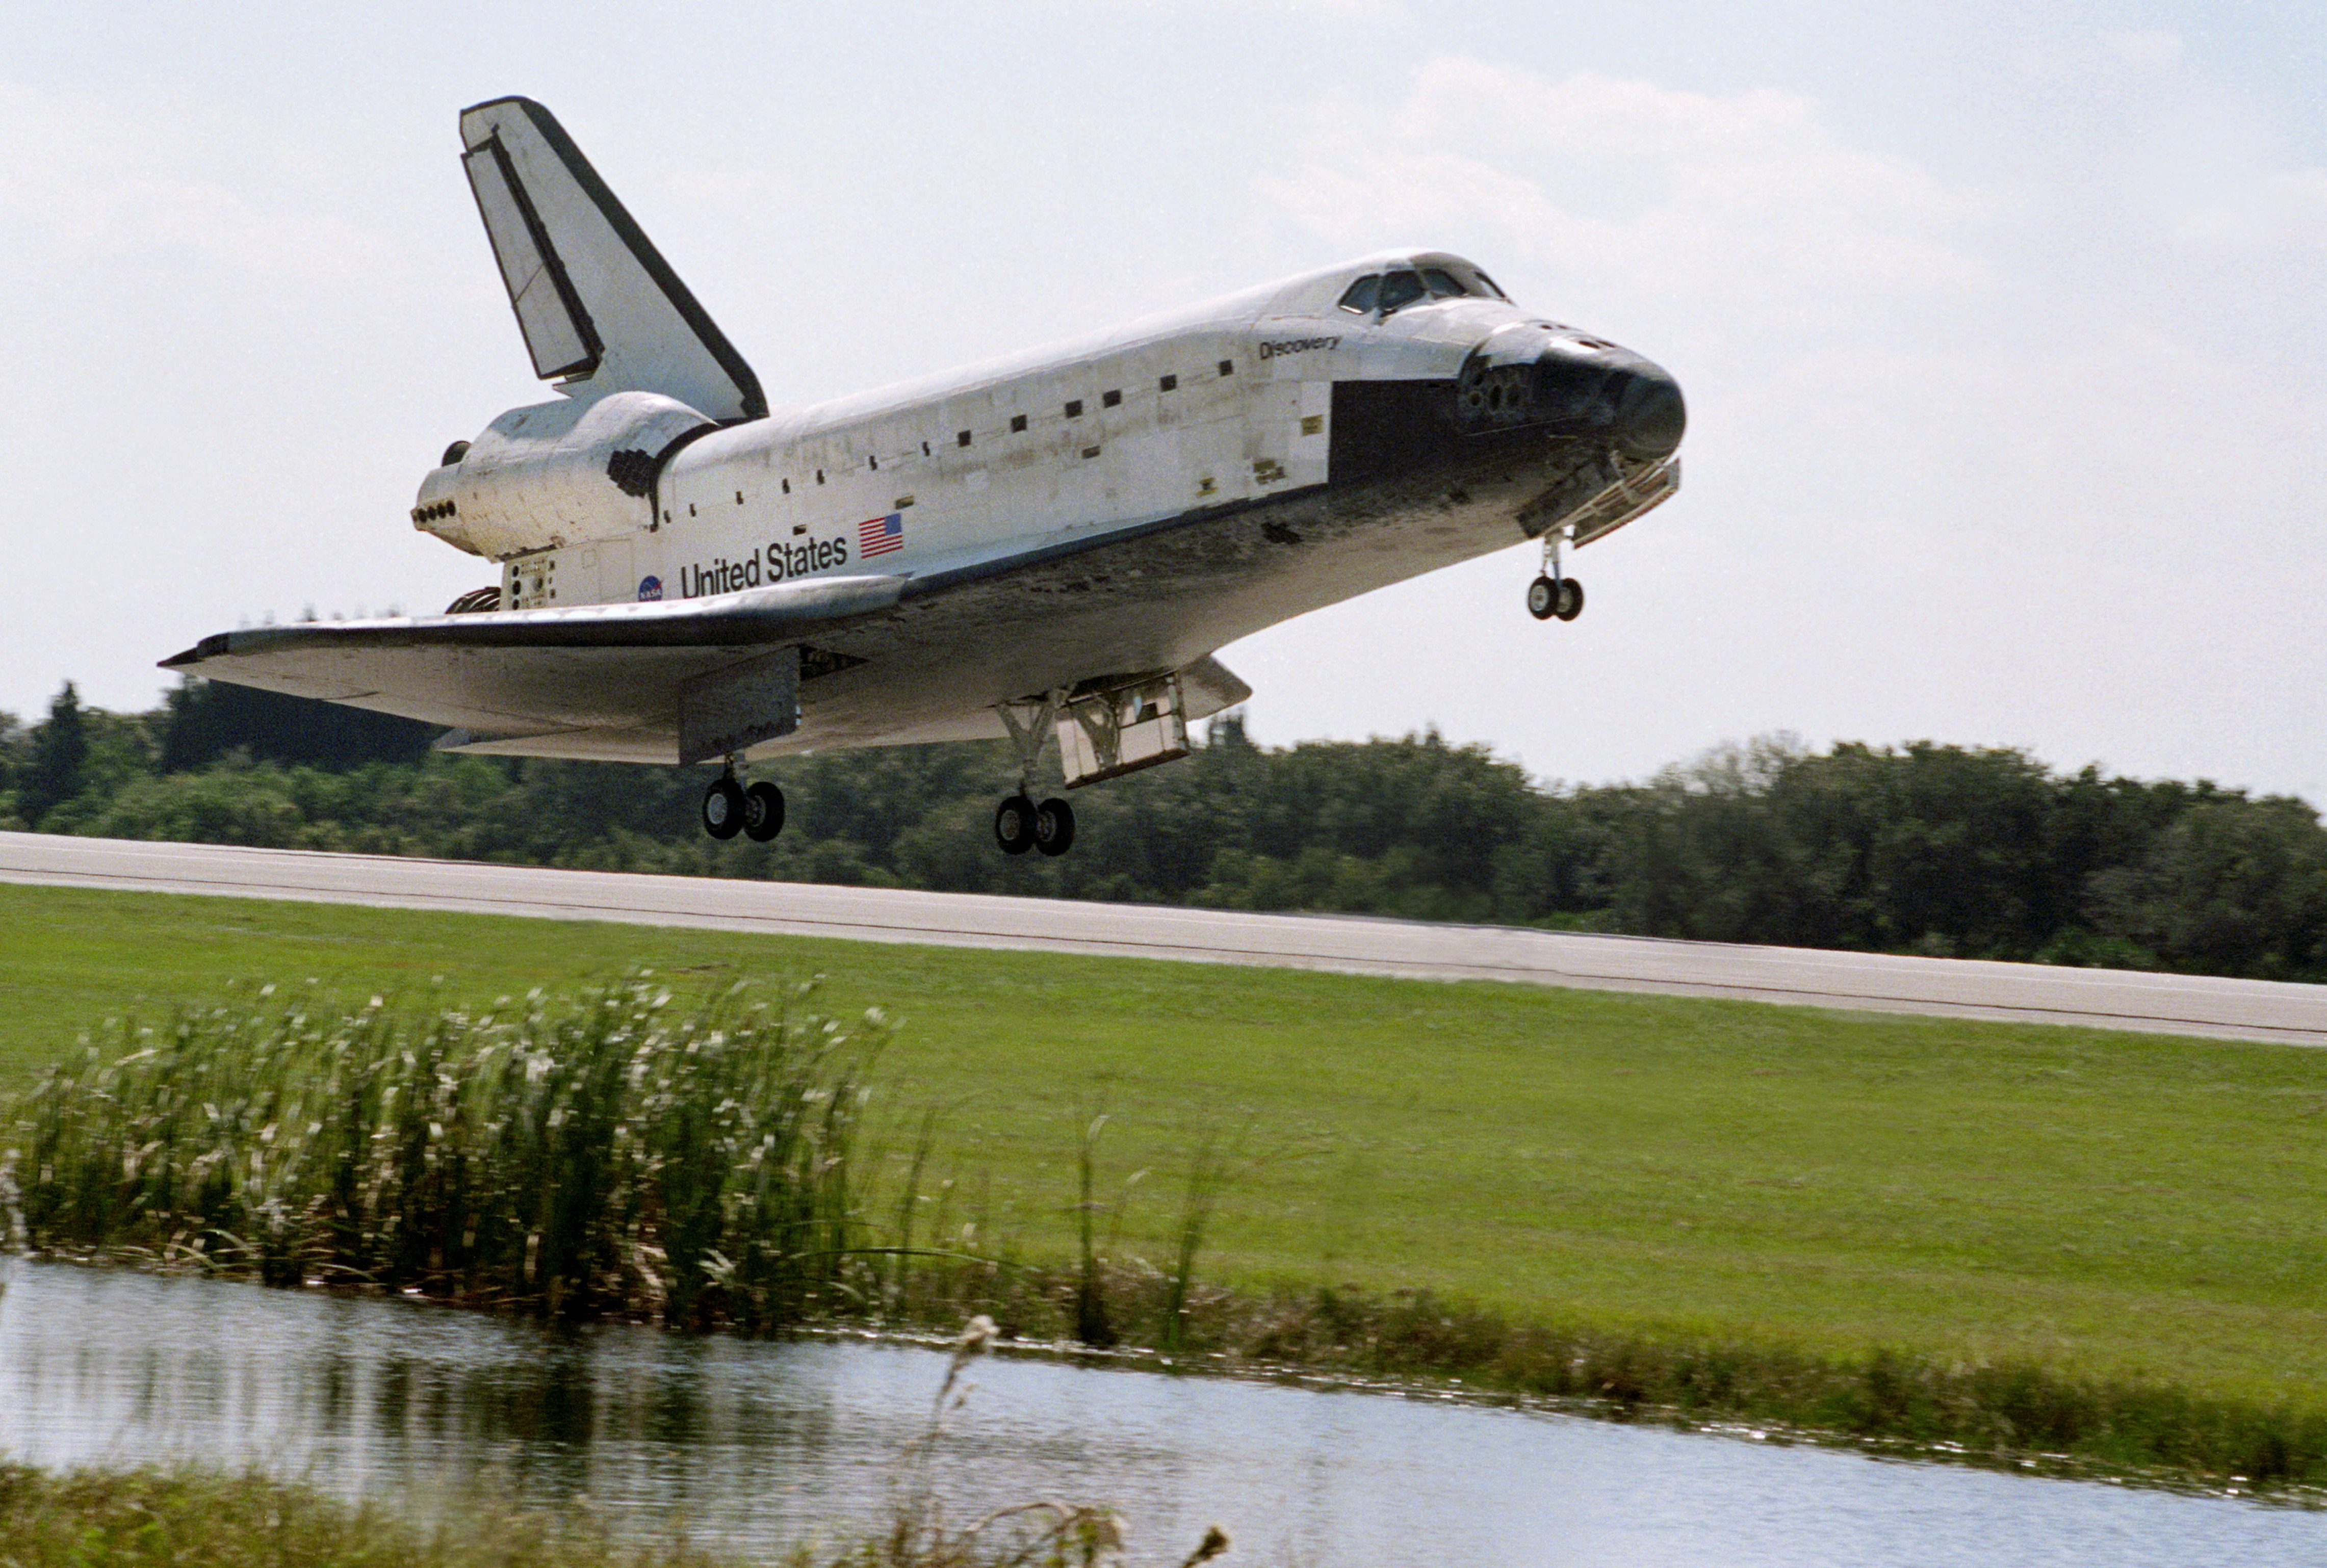 Space Shuttle Discovery lands at NASA’s Kennedy Space Center (KSC) in Florida to end the nine-day STS-95 mission